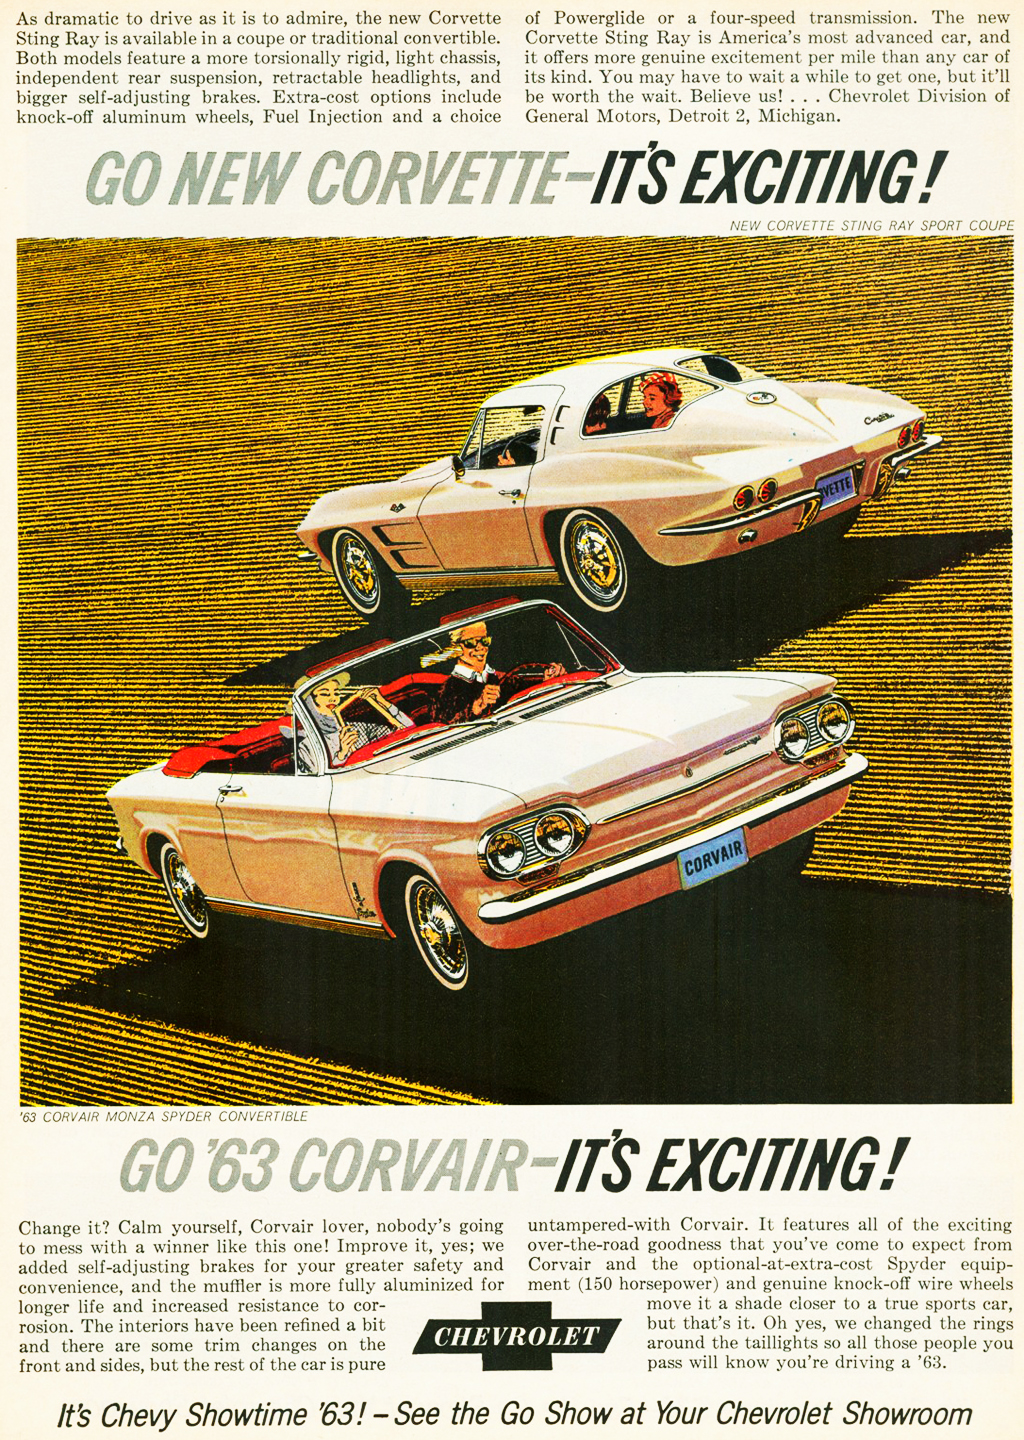 1963 Chevrolet Corvette and Corvair